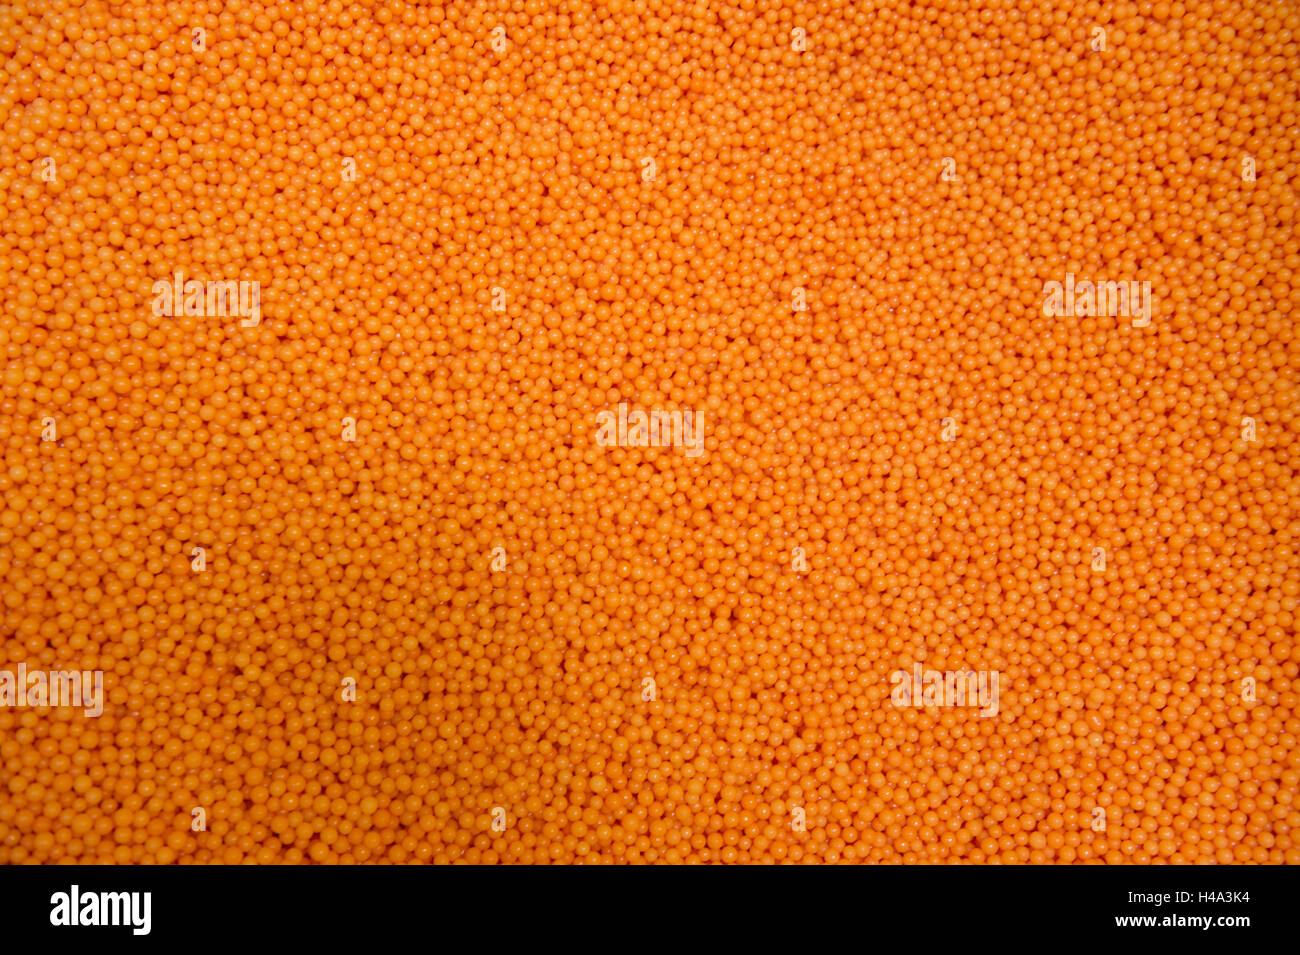 Gorlitz, Germany. 20th Sep, 2016. Orange love pearls can be seen in the sweets factory of Rudolf Hoinkis GmbH in Gorlitz, Germany, 20 September 2016. The sweets factory was founded on 16 August 1896 by Rudolf Hoinkis, the grandfather of nowadays' factory owner, Matthias Hoinkis. The business owes its worldwide publicity to the invention of the 'love pearl'. PHOTO: ARNO BURGI/dpa/Alamy Live News Stock Photo